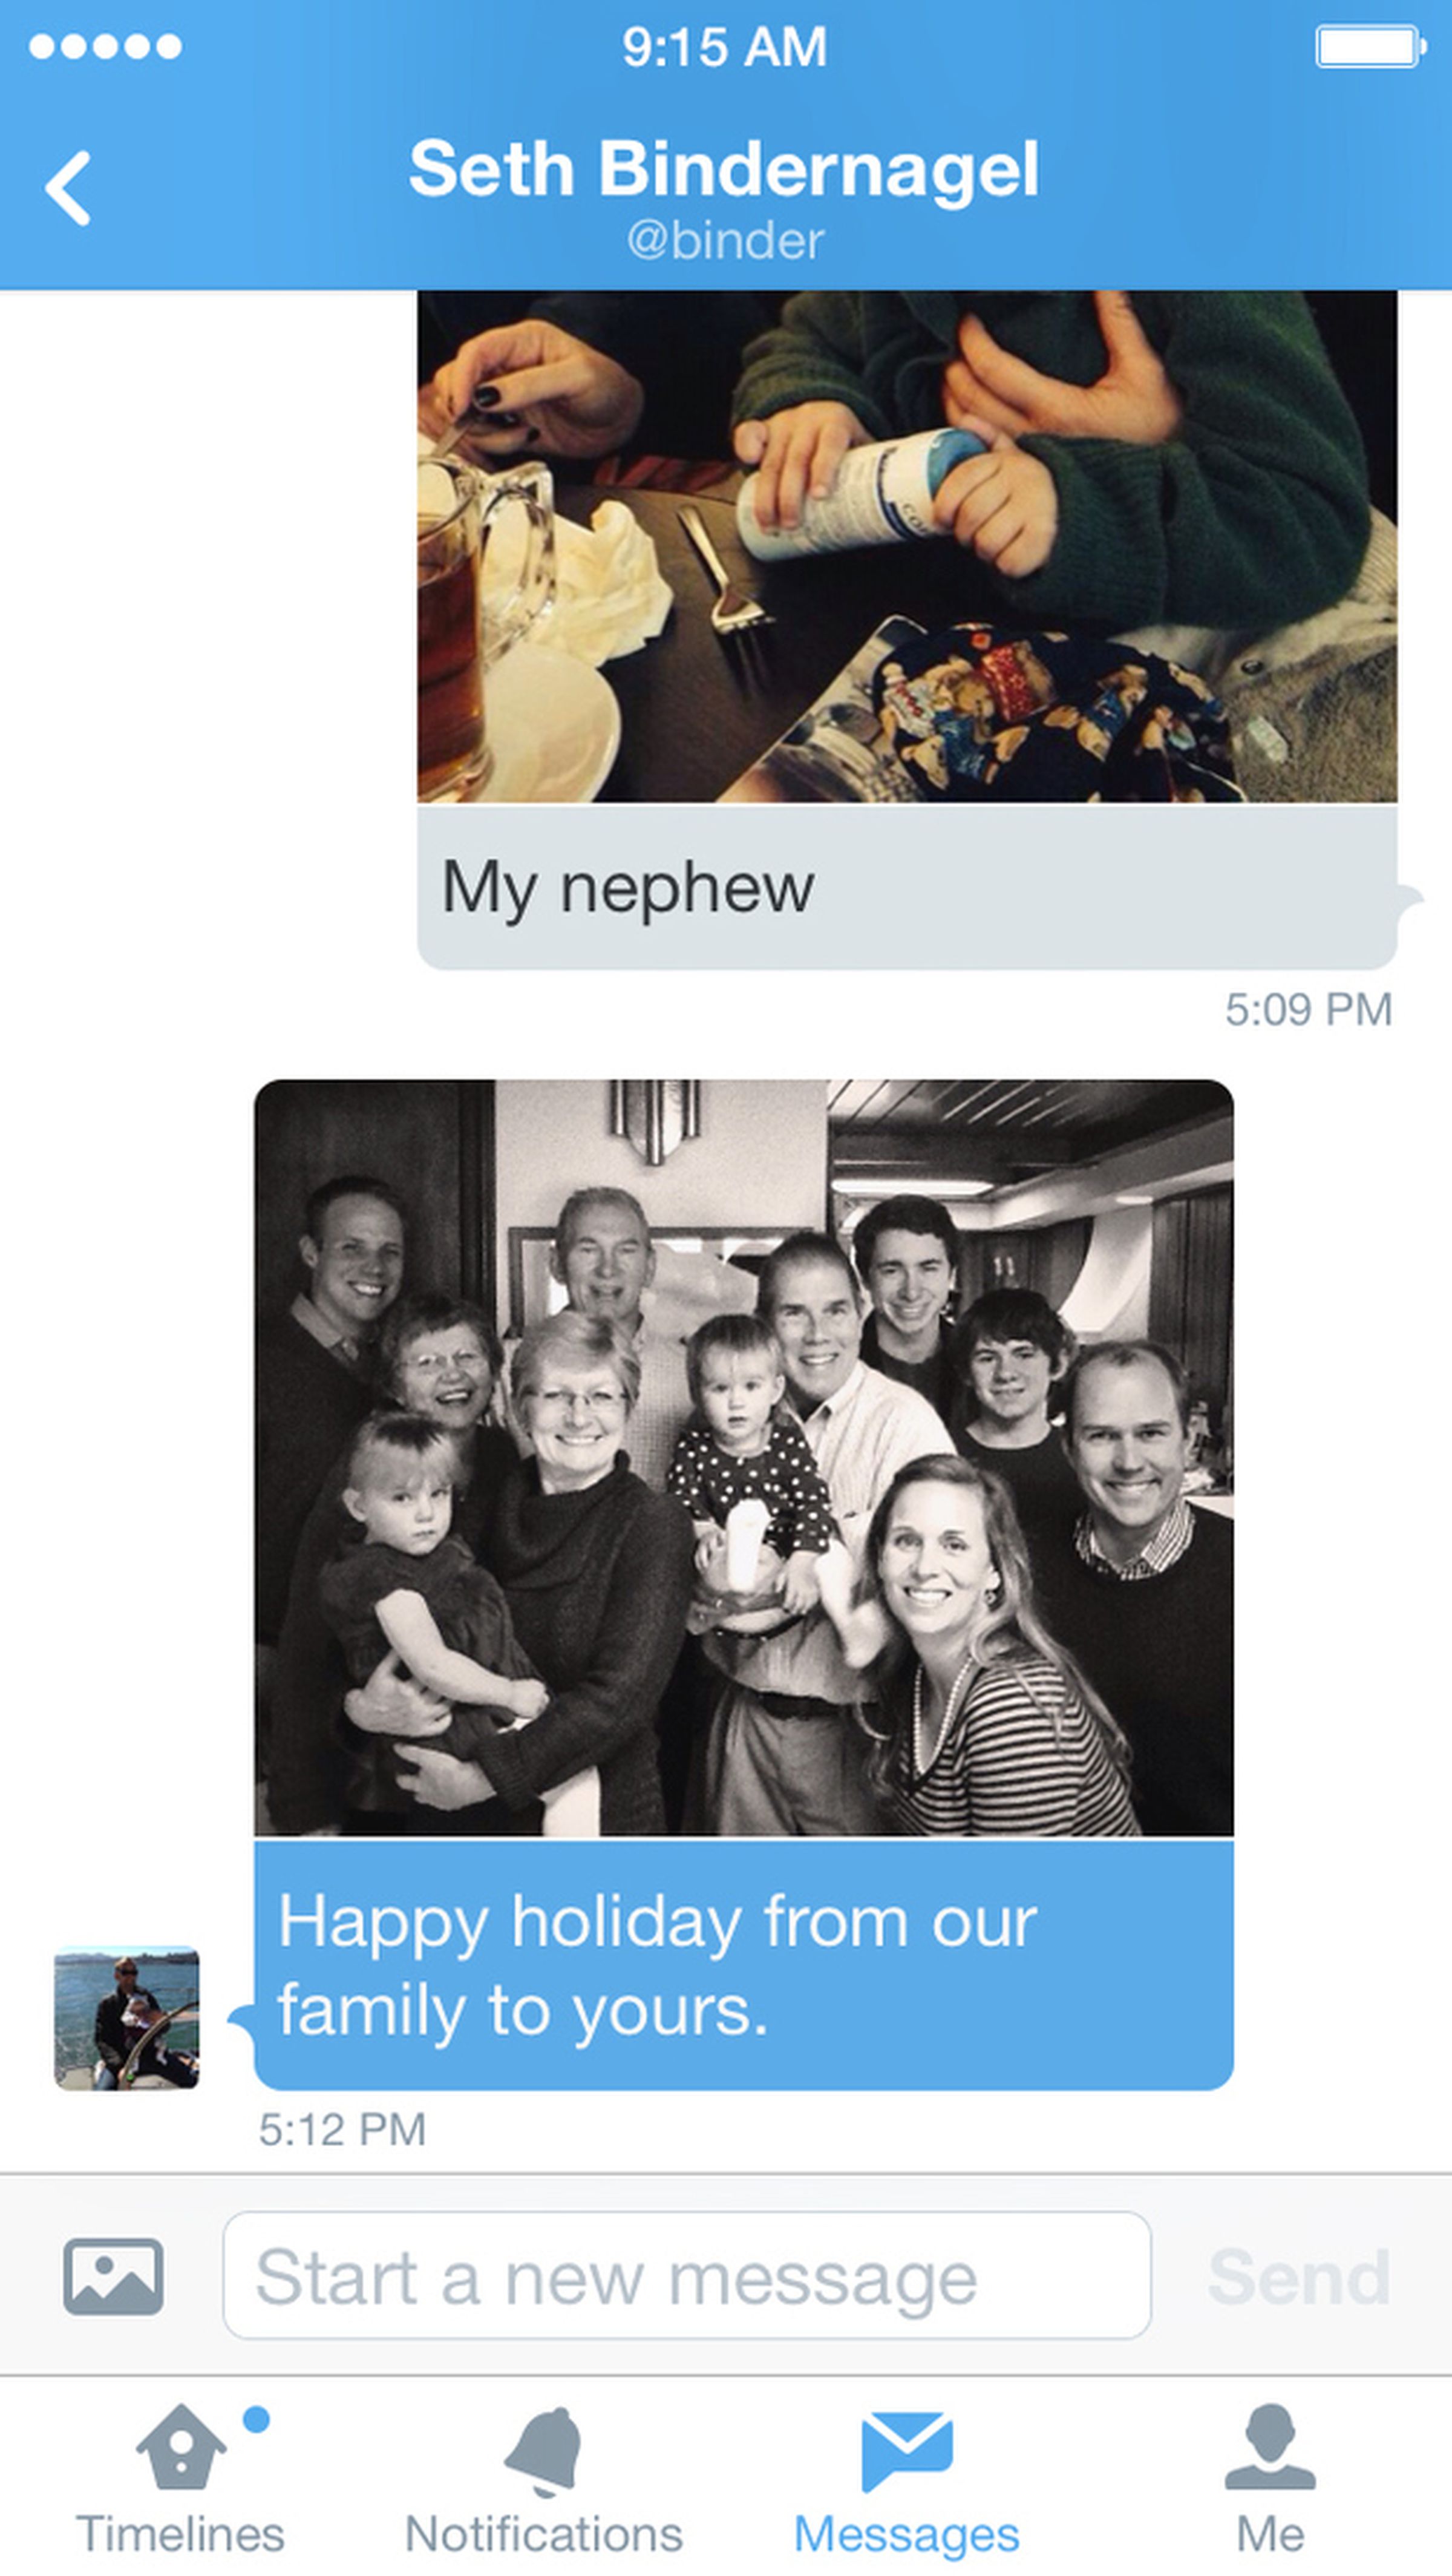 Twitter apps get photos in direct messages